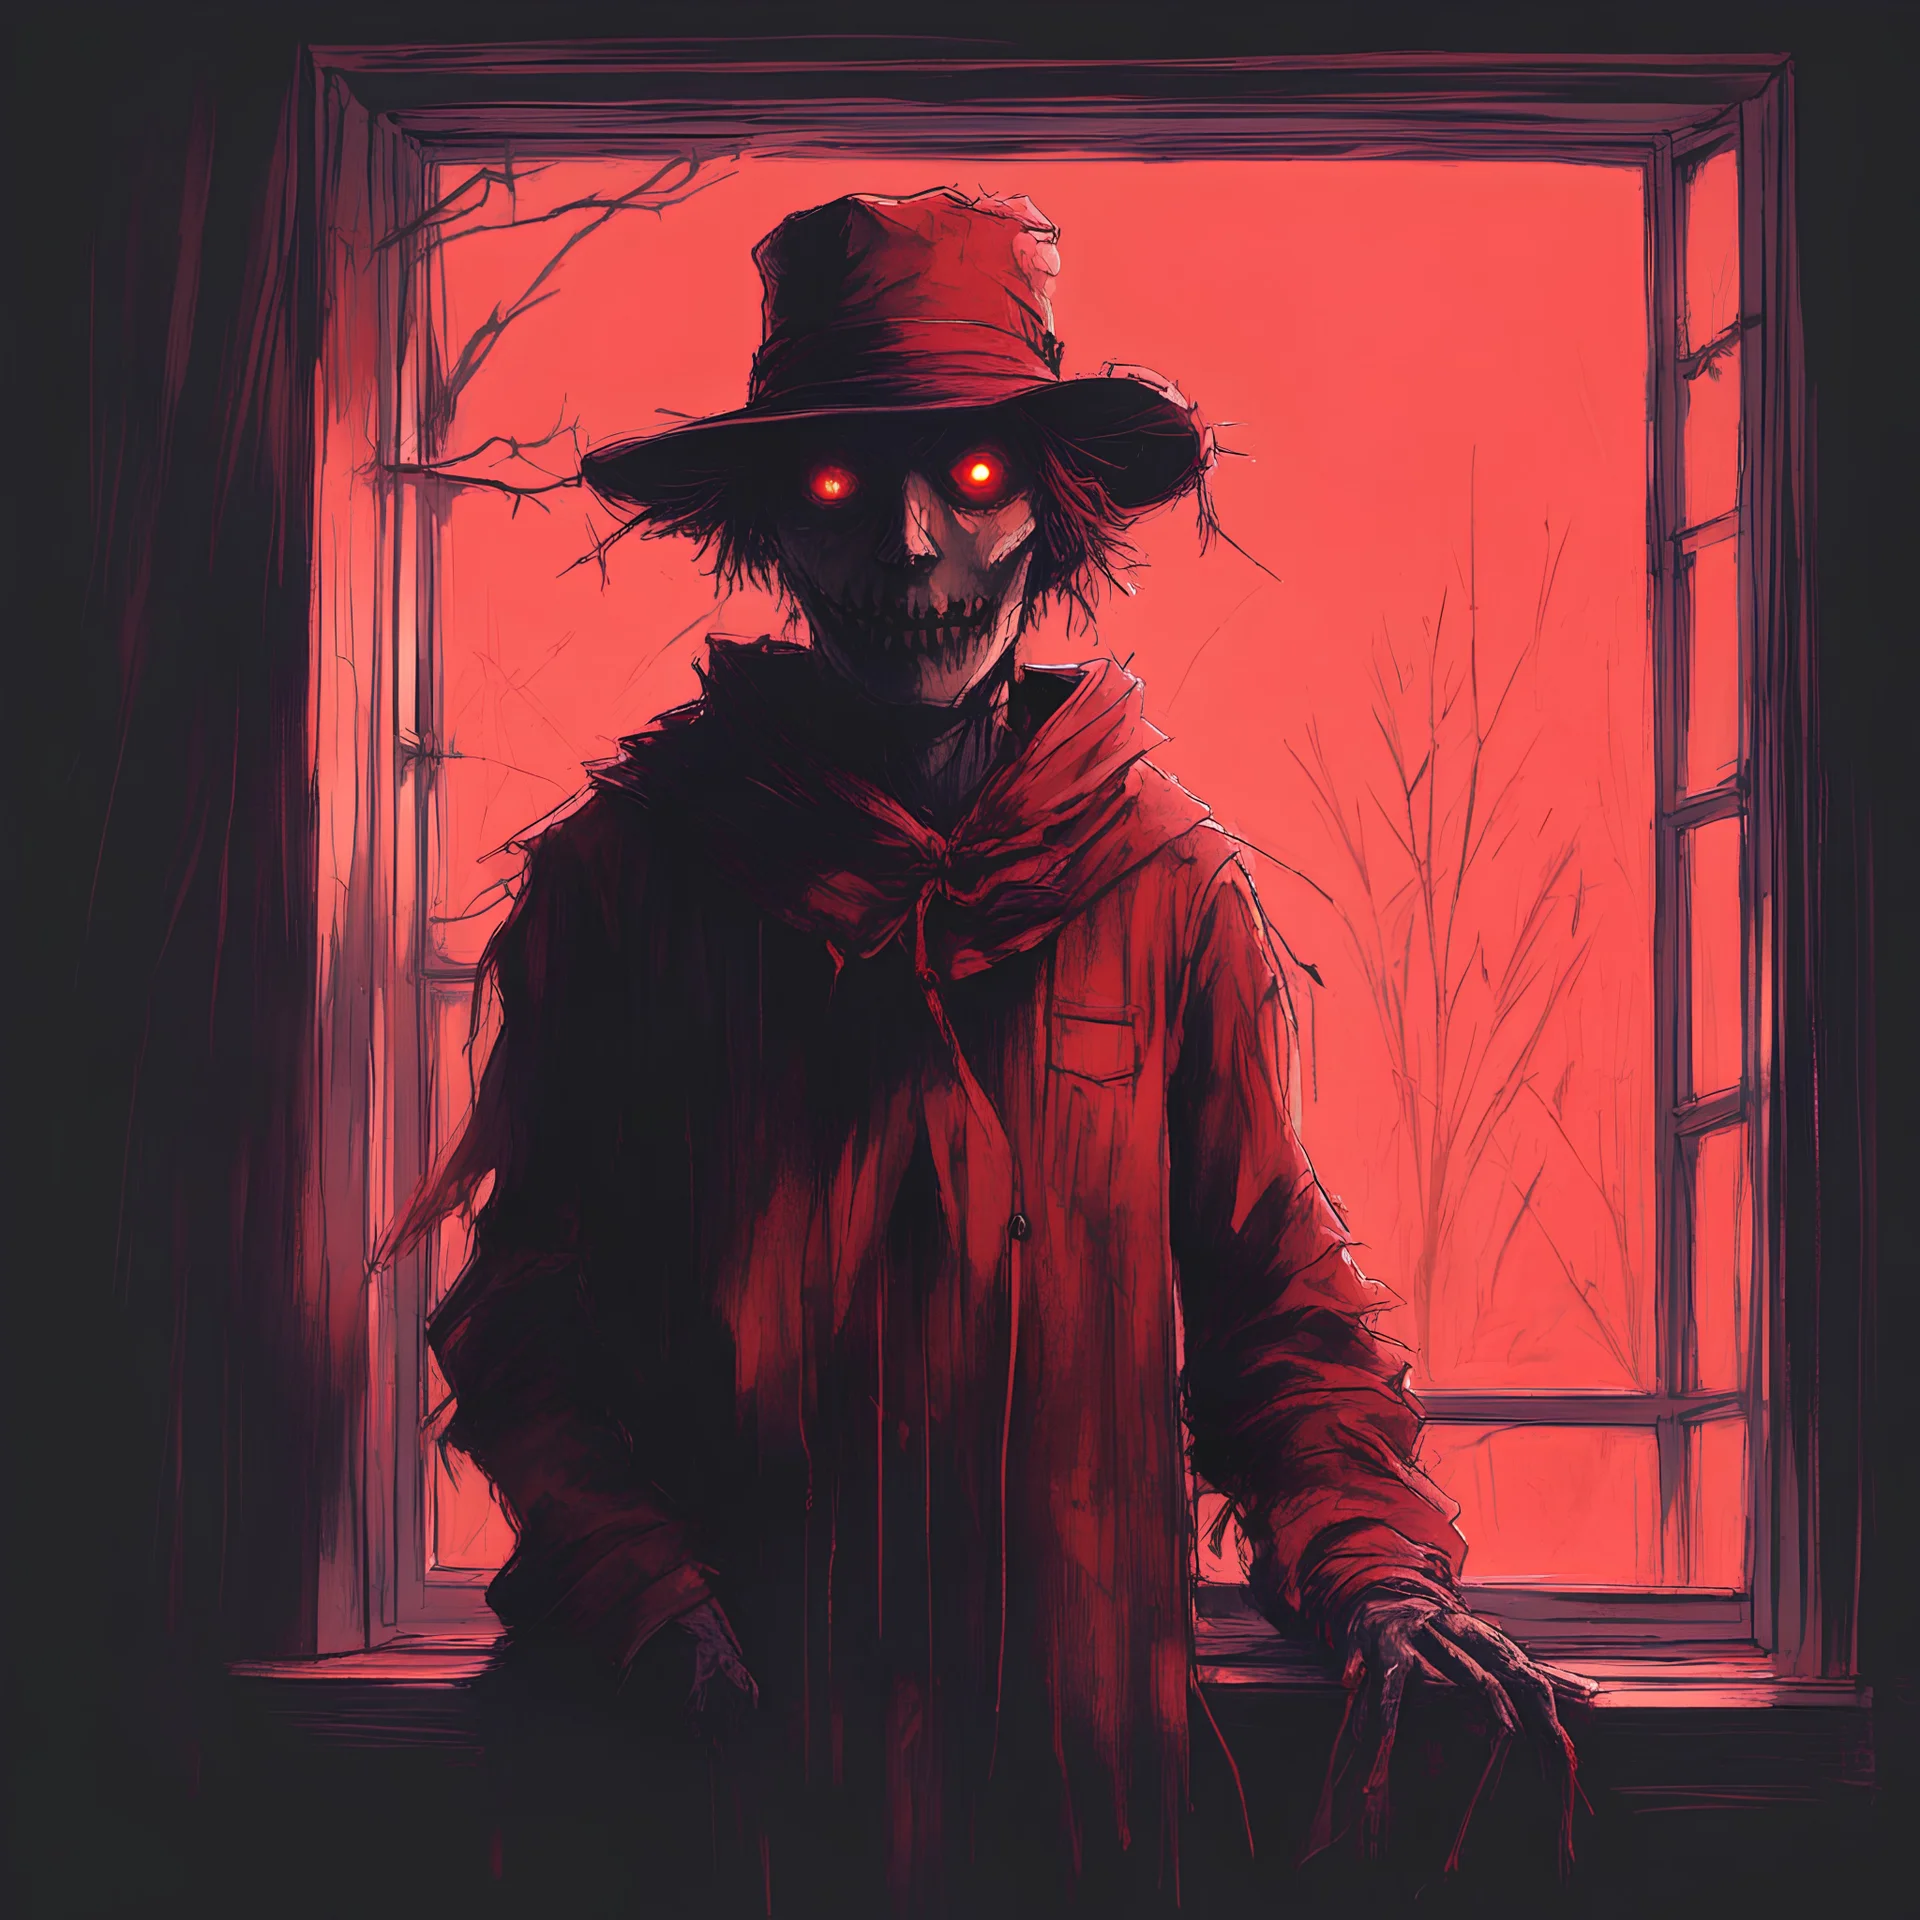 drawing of a scary scarecrow looking in window, dramatic, horror, by William Wray, 2D illustration, red hues